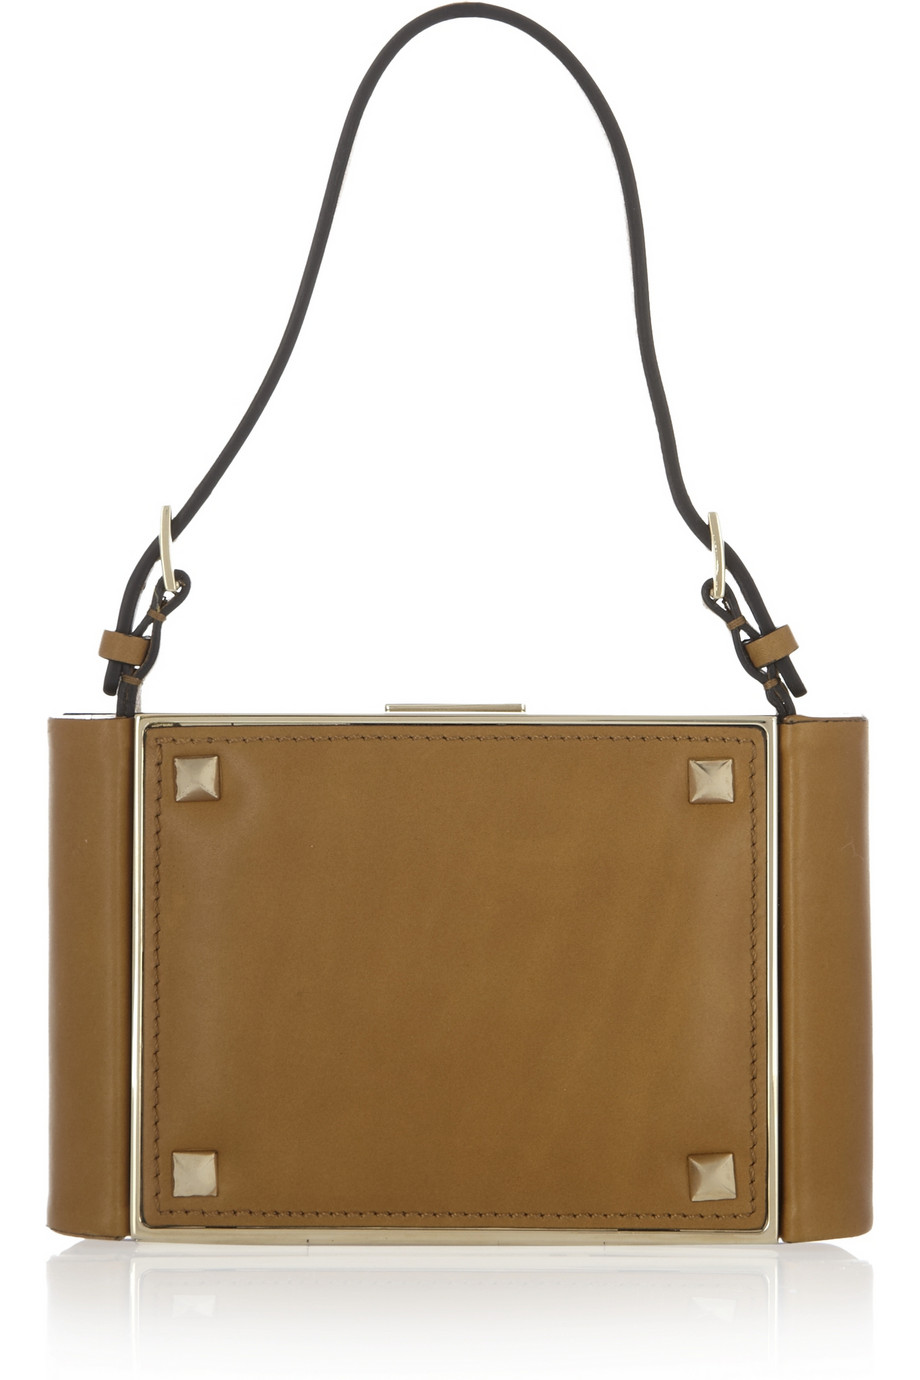 Valentino Leather Shoulder Bag in Tan (Brown) - Lyst